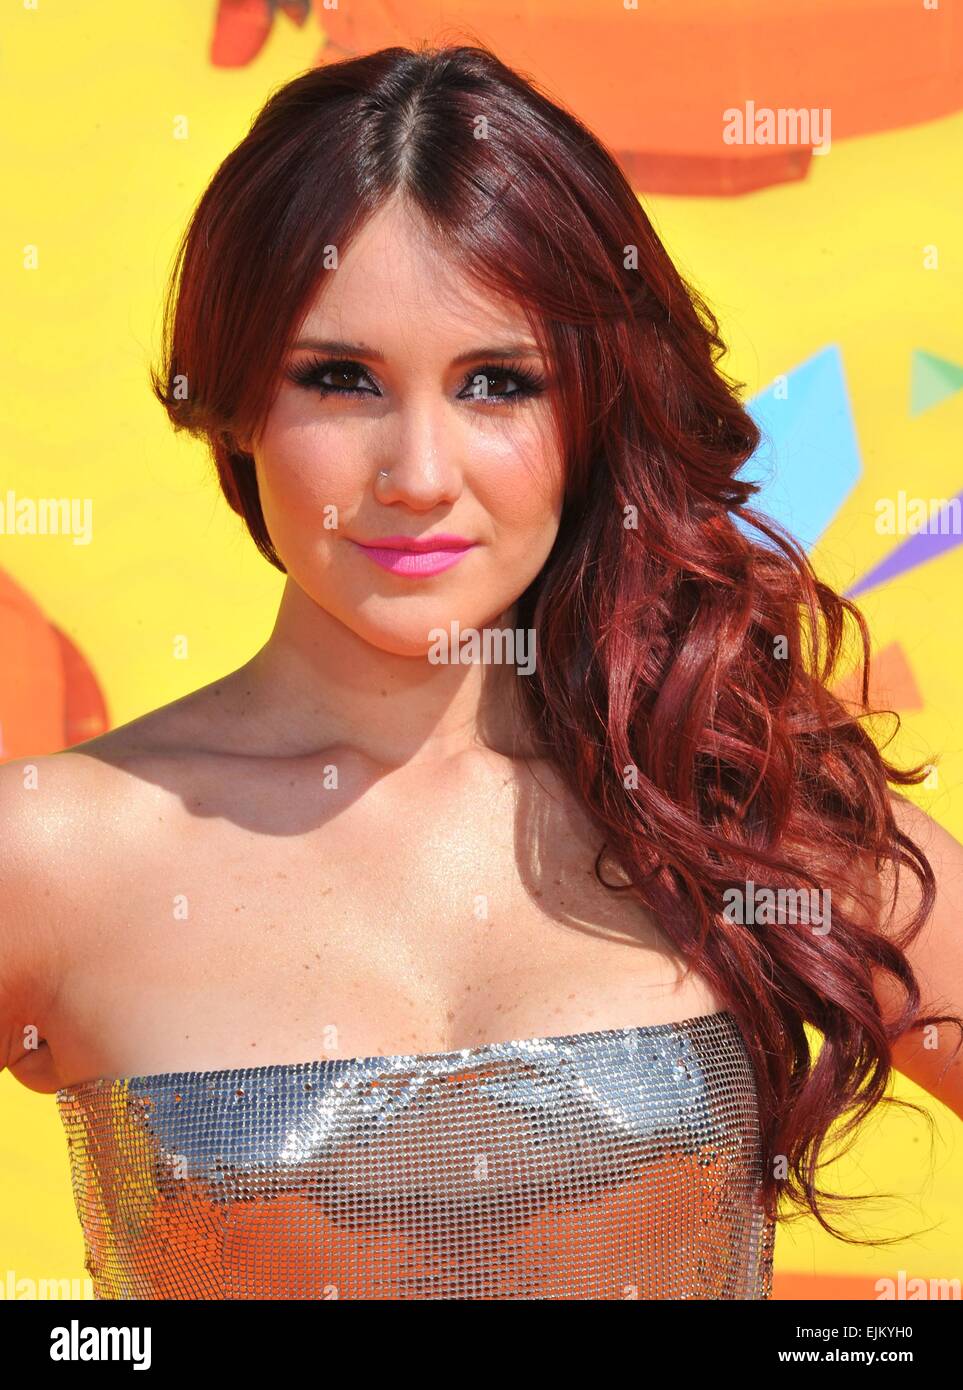 Los Angeles, CA, USA. 28th Mar, 2015. Dulce Maria at arrivals for Nickelodeon's 28th Annual Kids' Choice Awards 2015 - Part 1, The Forum, Los Angeles, CA March 28, 2015. Credit:  Dee Cercone/Everett Collection/Alamy Live News Stock Photo